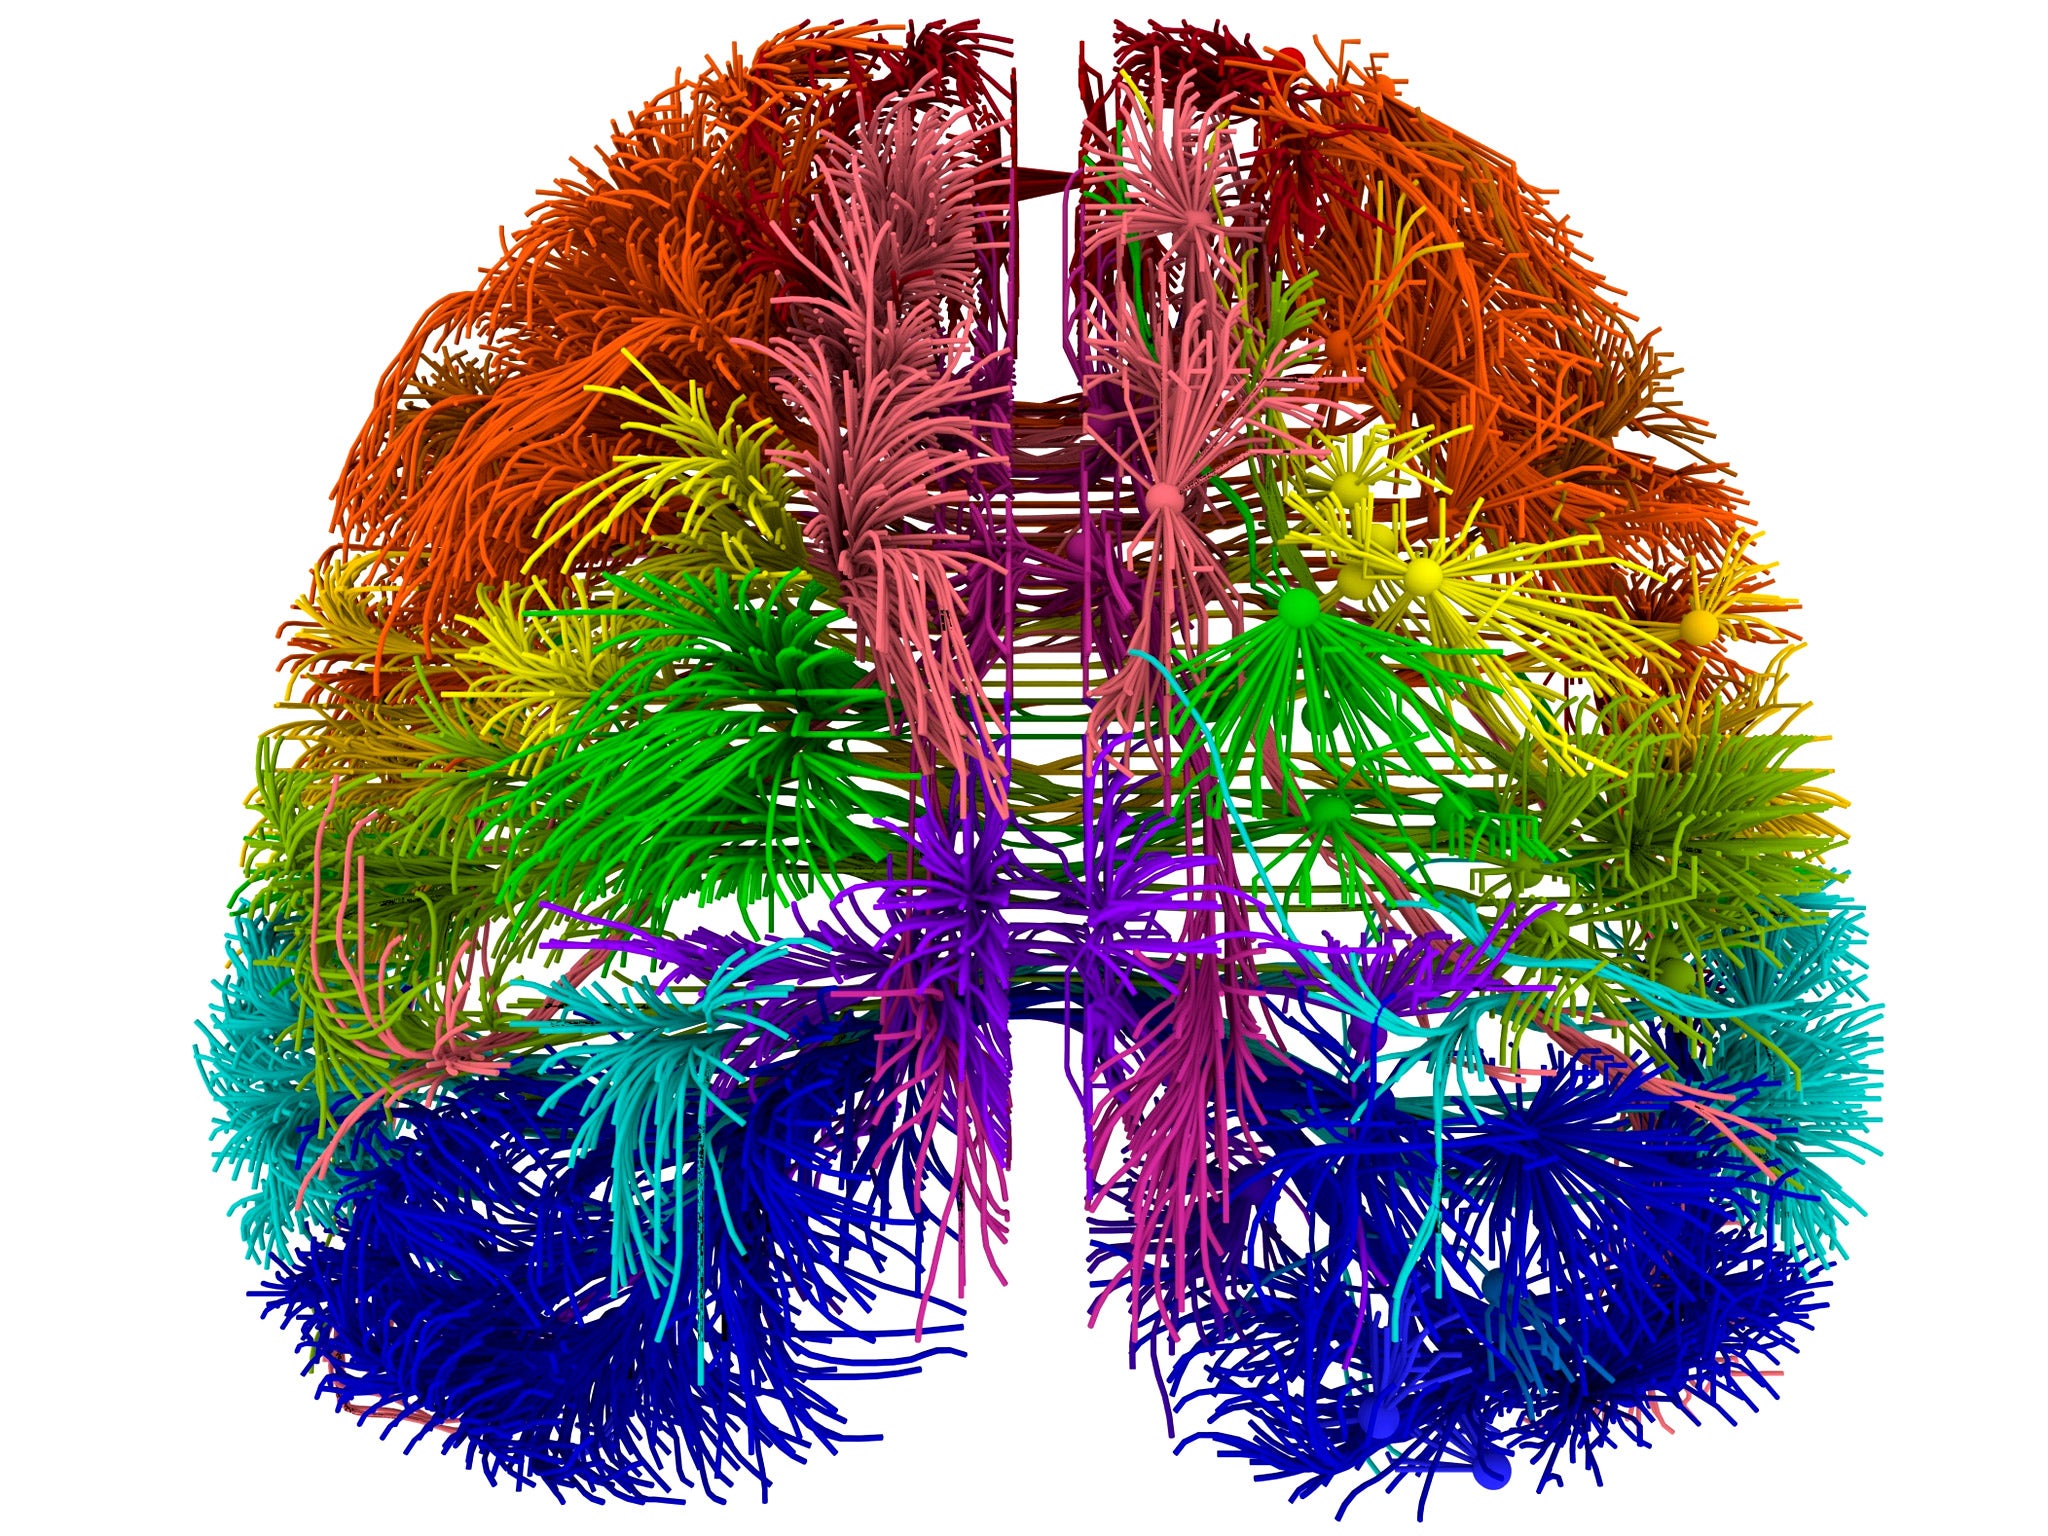 A top-down view of the connections between several distinct cortical areas, visualized using Allen Institute software